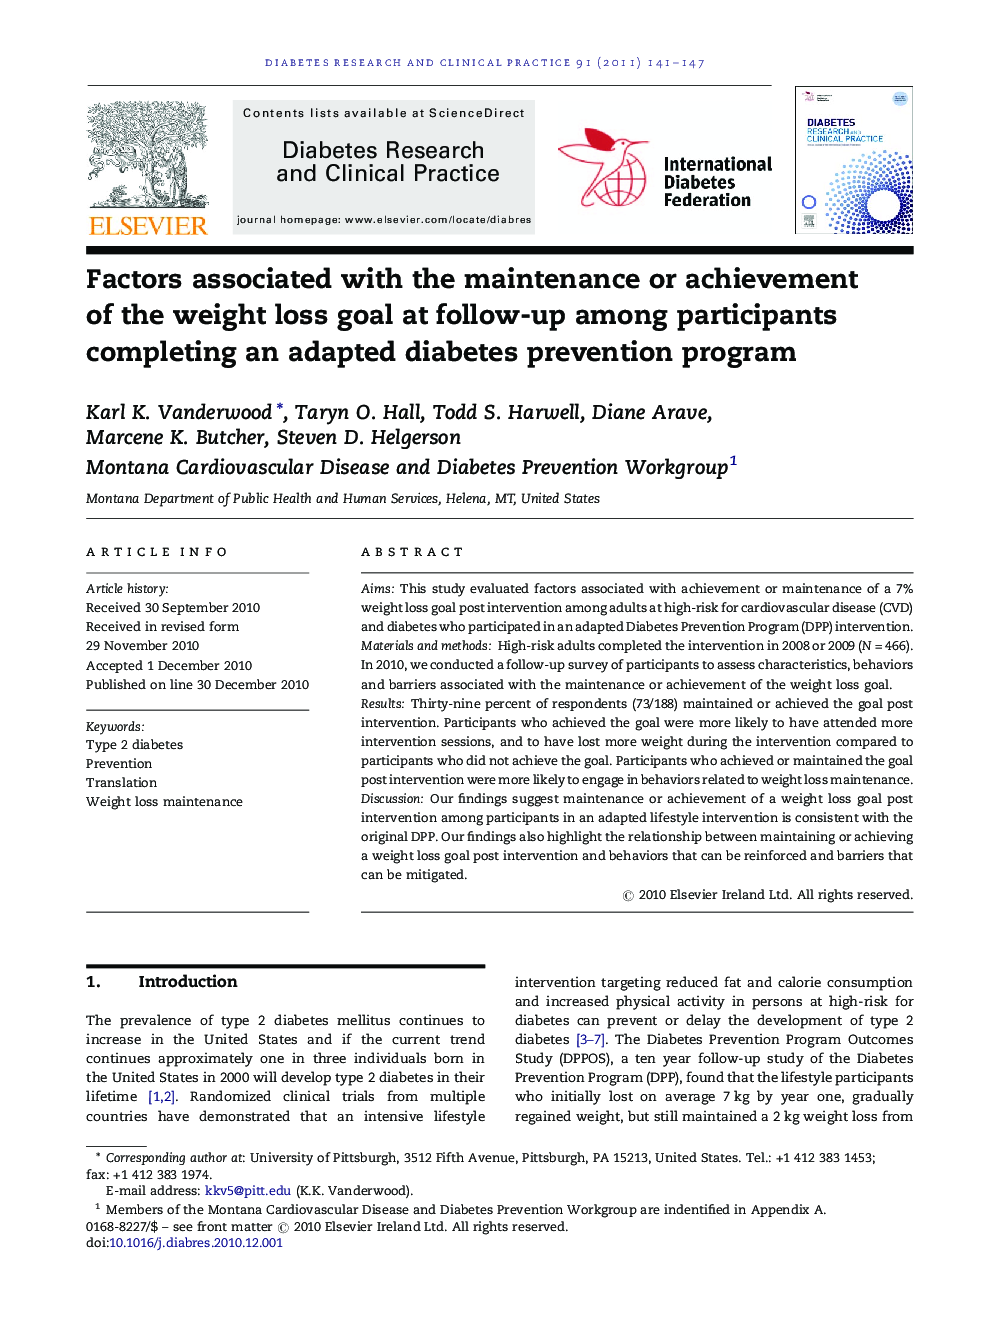 Factors associated with the maintenance or achievement of the weight loss goal at follow-up among participants completing an adapted diabetes prevention program